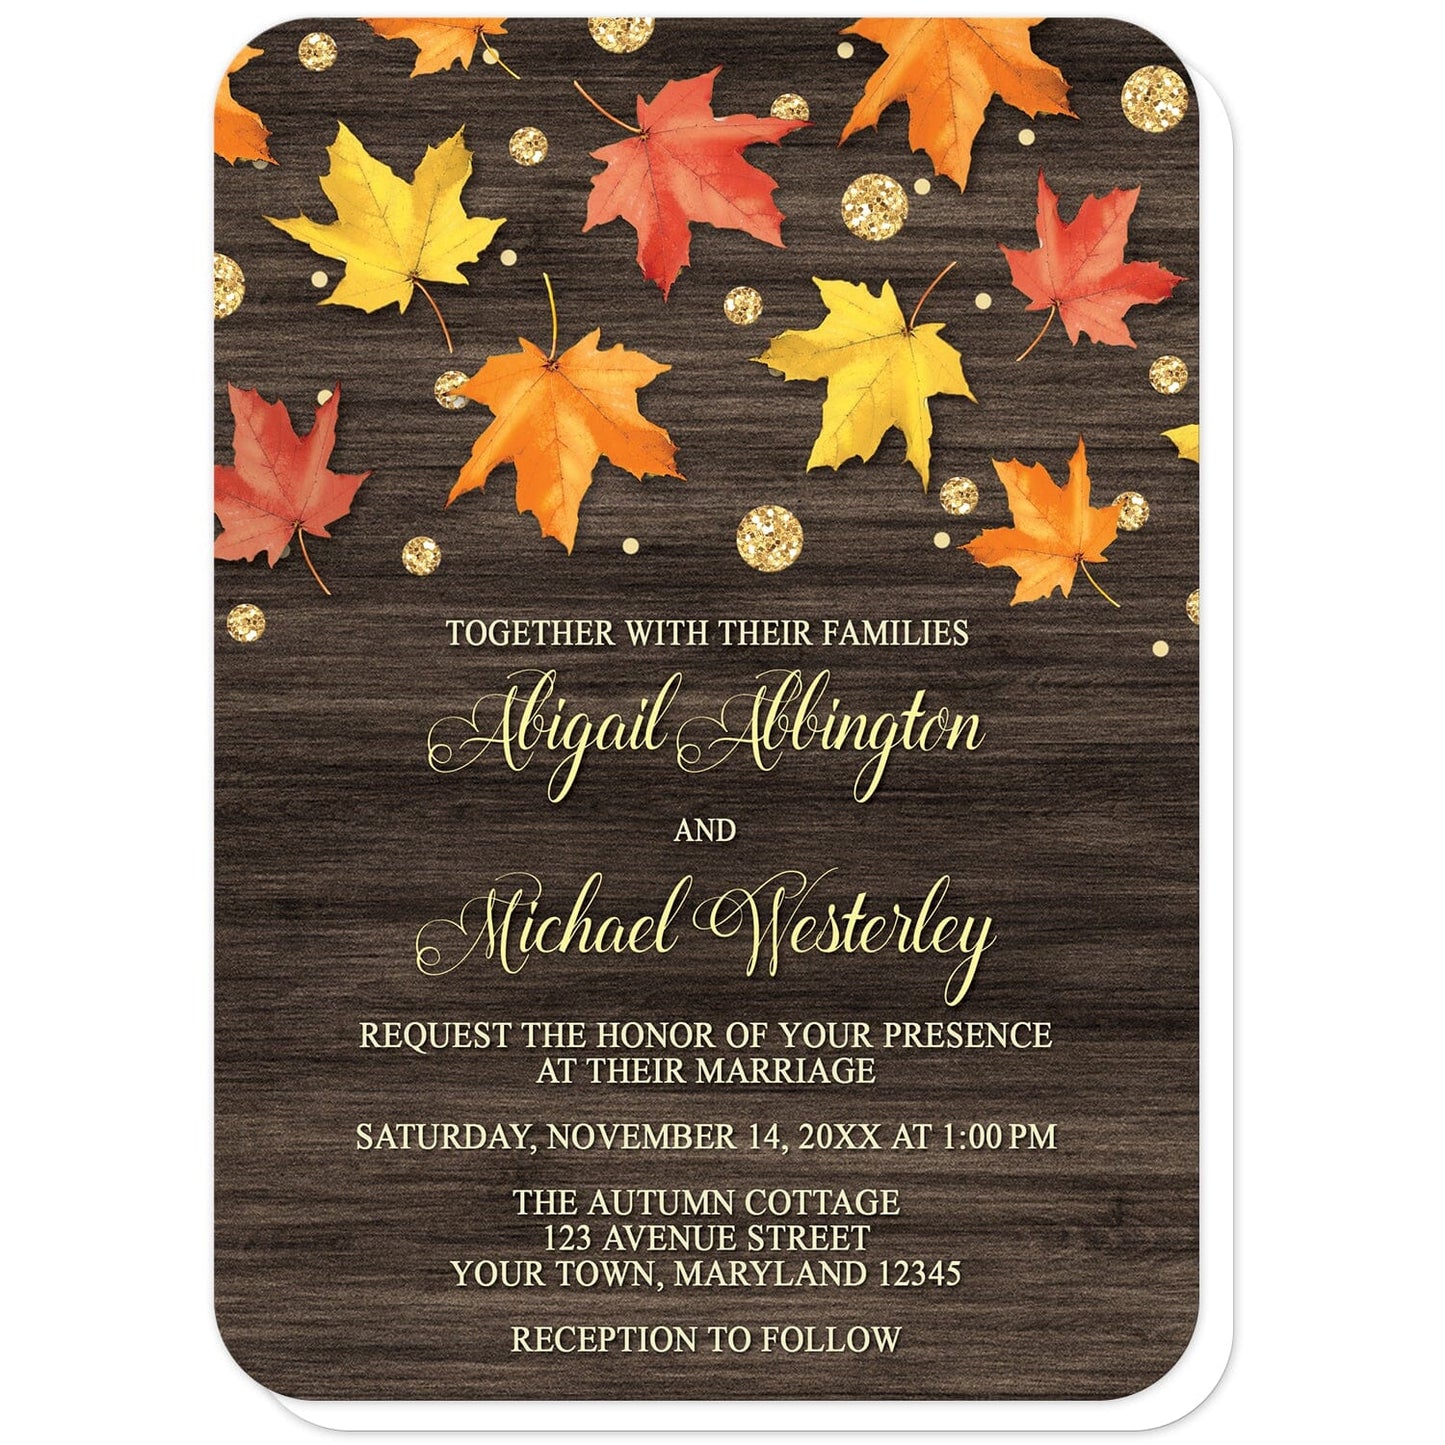 Falling Leaves with Gold Autumn Wedding Invitations (with rounded corners) at Artistically Invited. Beautiful rustic falling leaves with gold autumn wedding invitations with red, orange, and yellow fall leaves scattered and falling along the top, coupled with gold-colored glitter-illustrated circles, over a dark brown wood background. Your personalized marriage celebration details are custom printed in very light yellow and gold over the wood background.